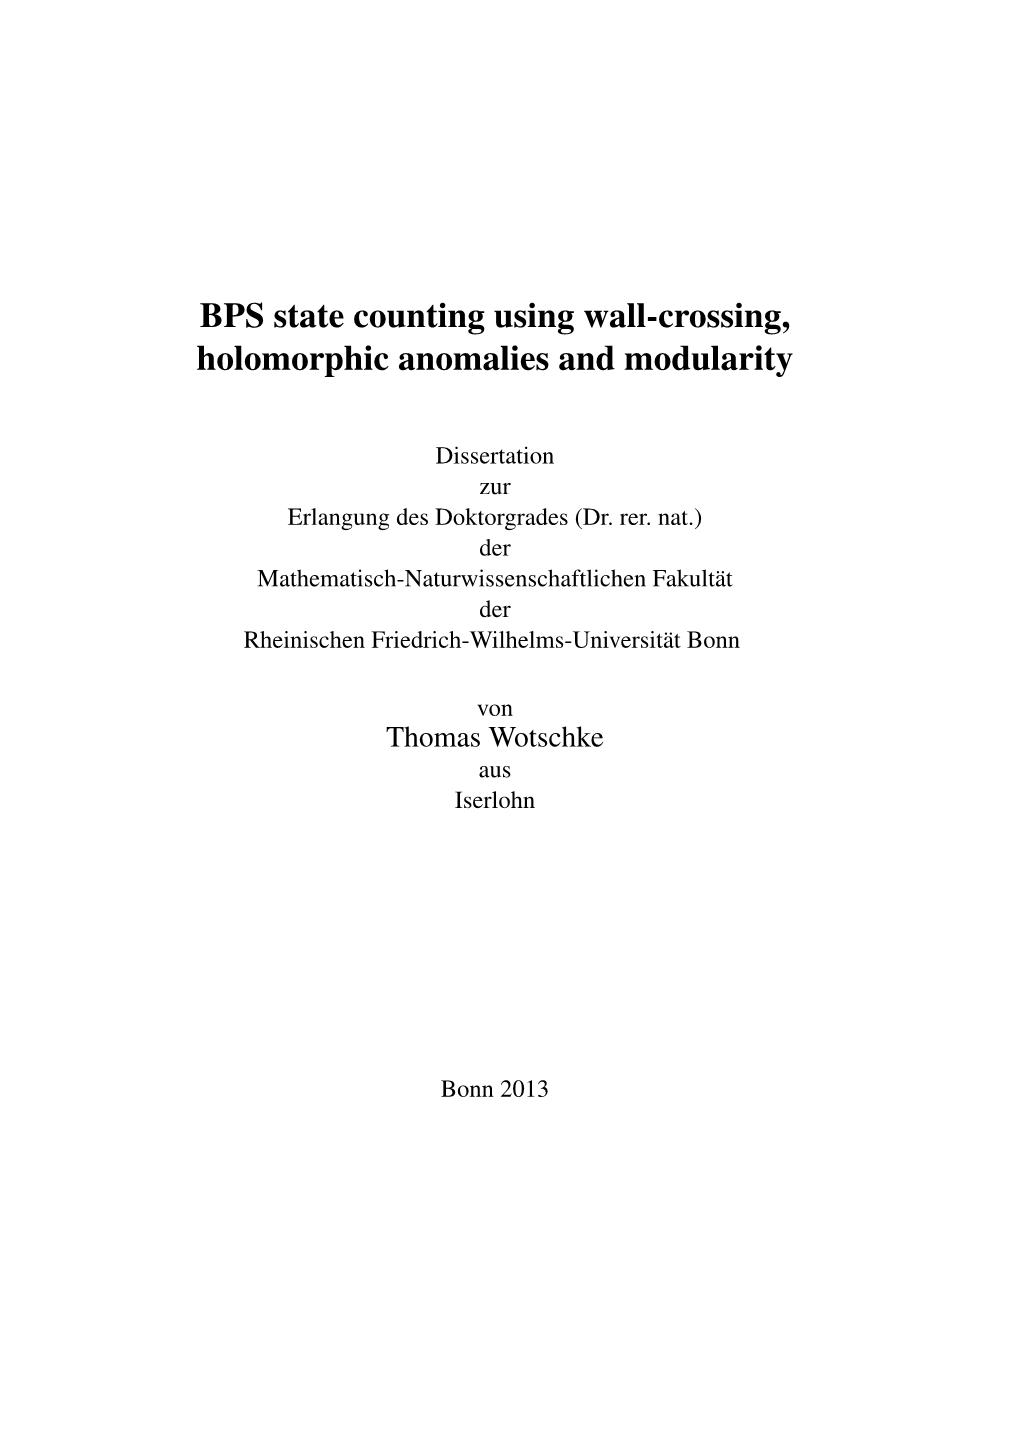 BPS State Counting Using Wall-Crossing, Holomorphic Anomalies and Modularity